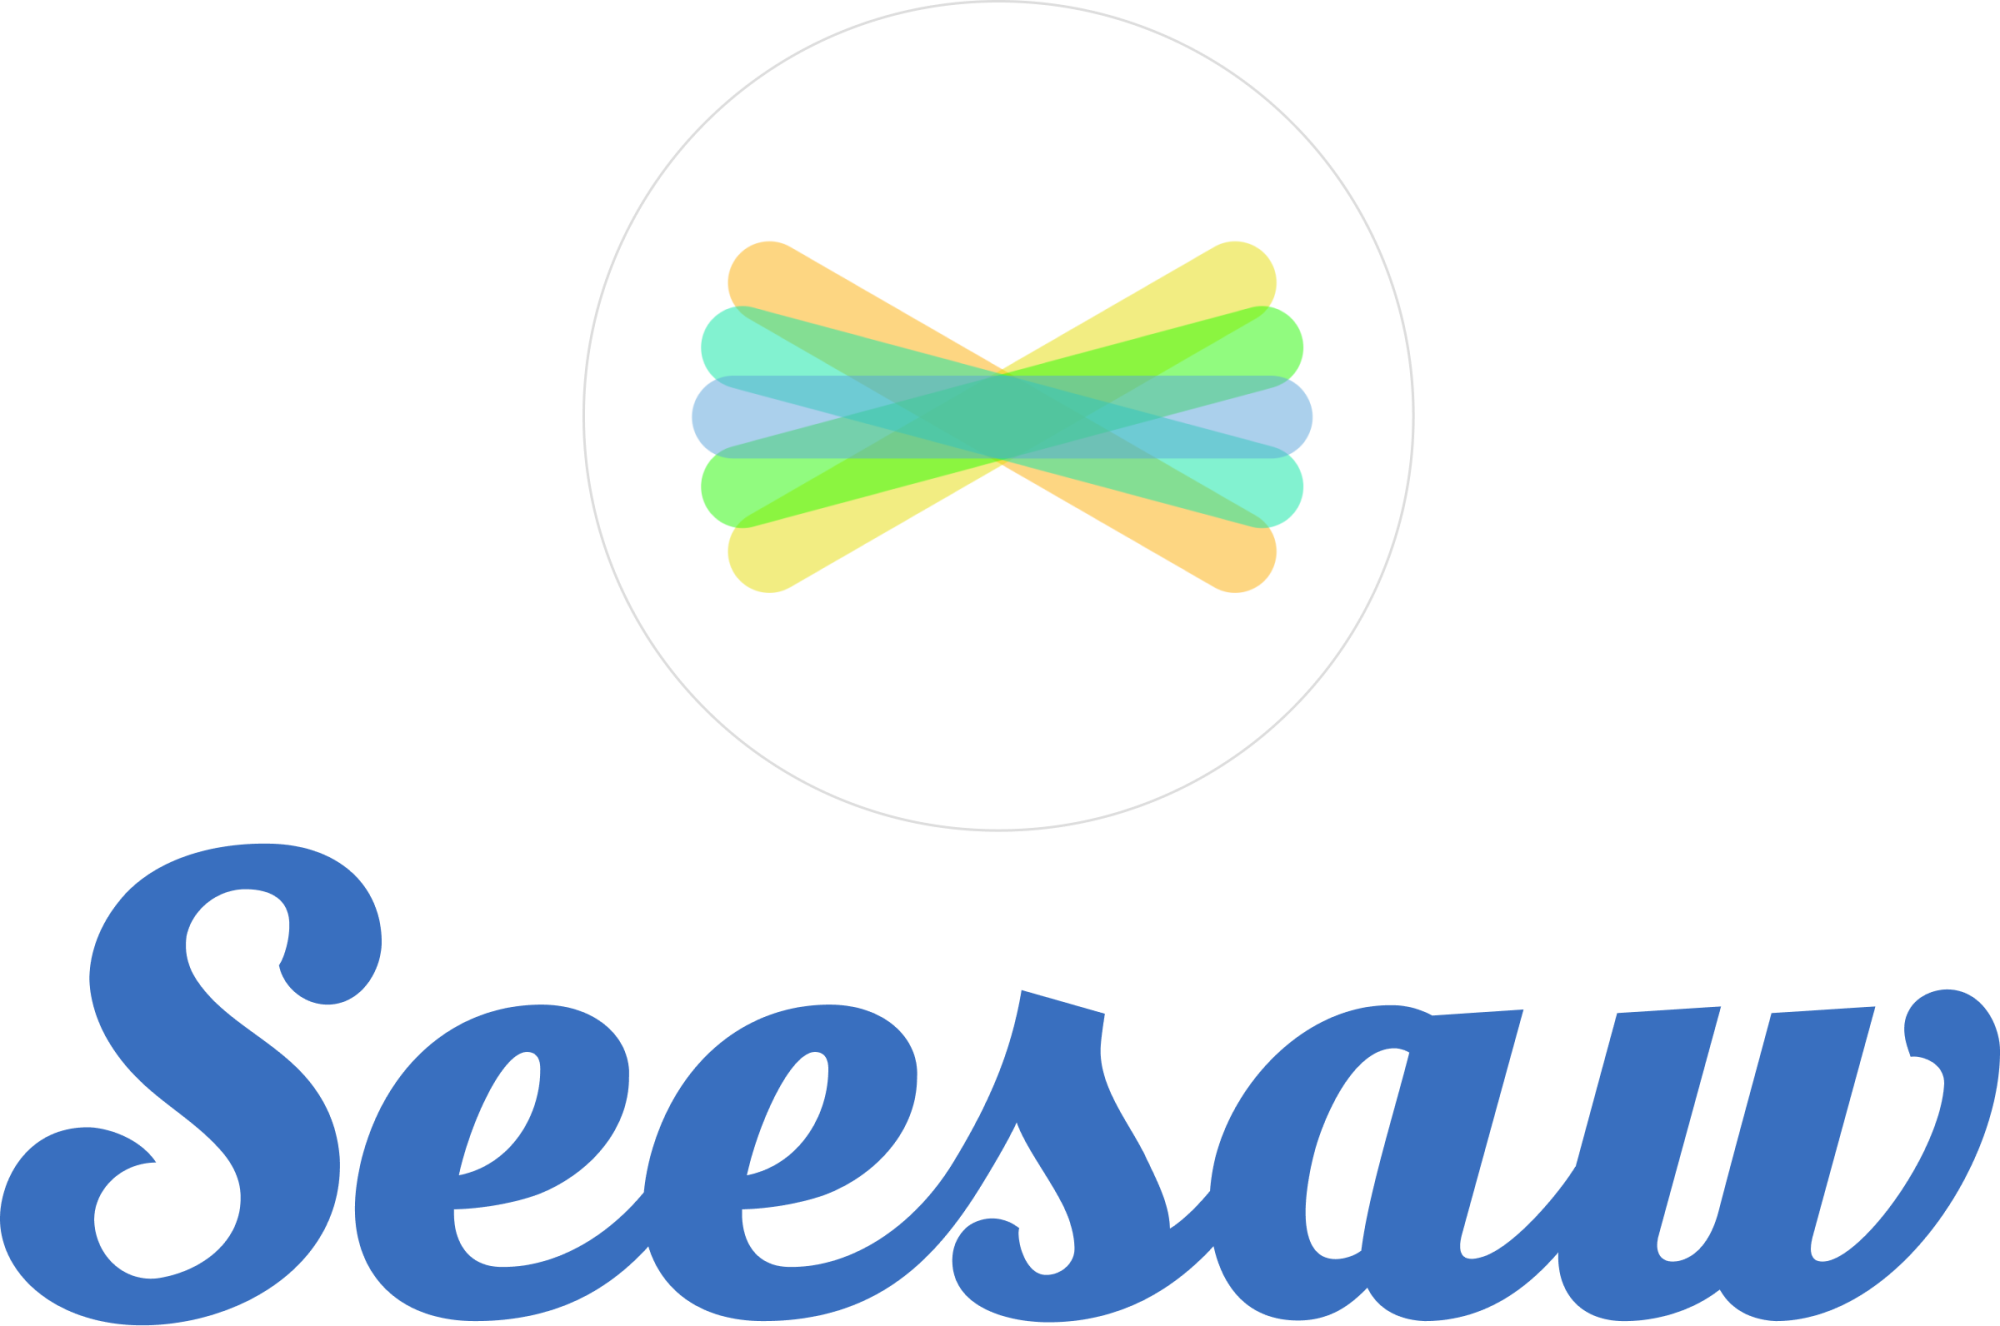 seesaw-stacked.png